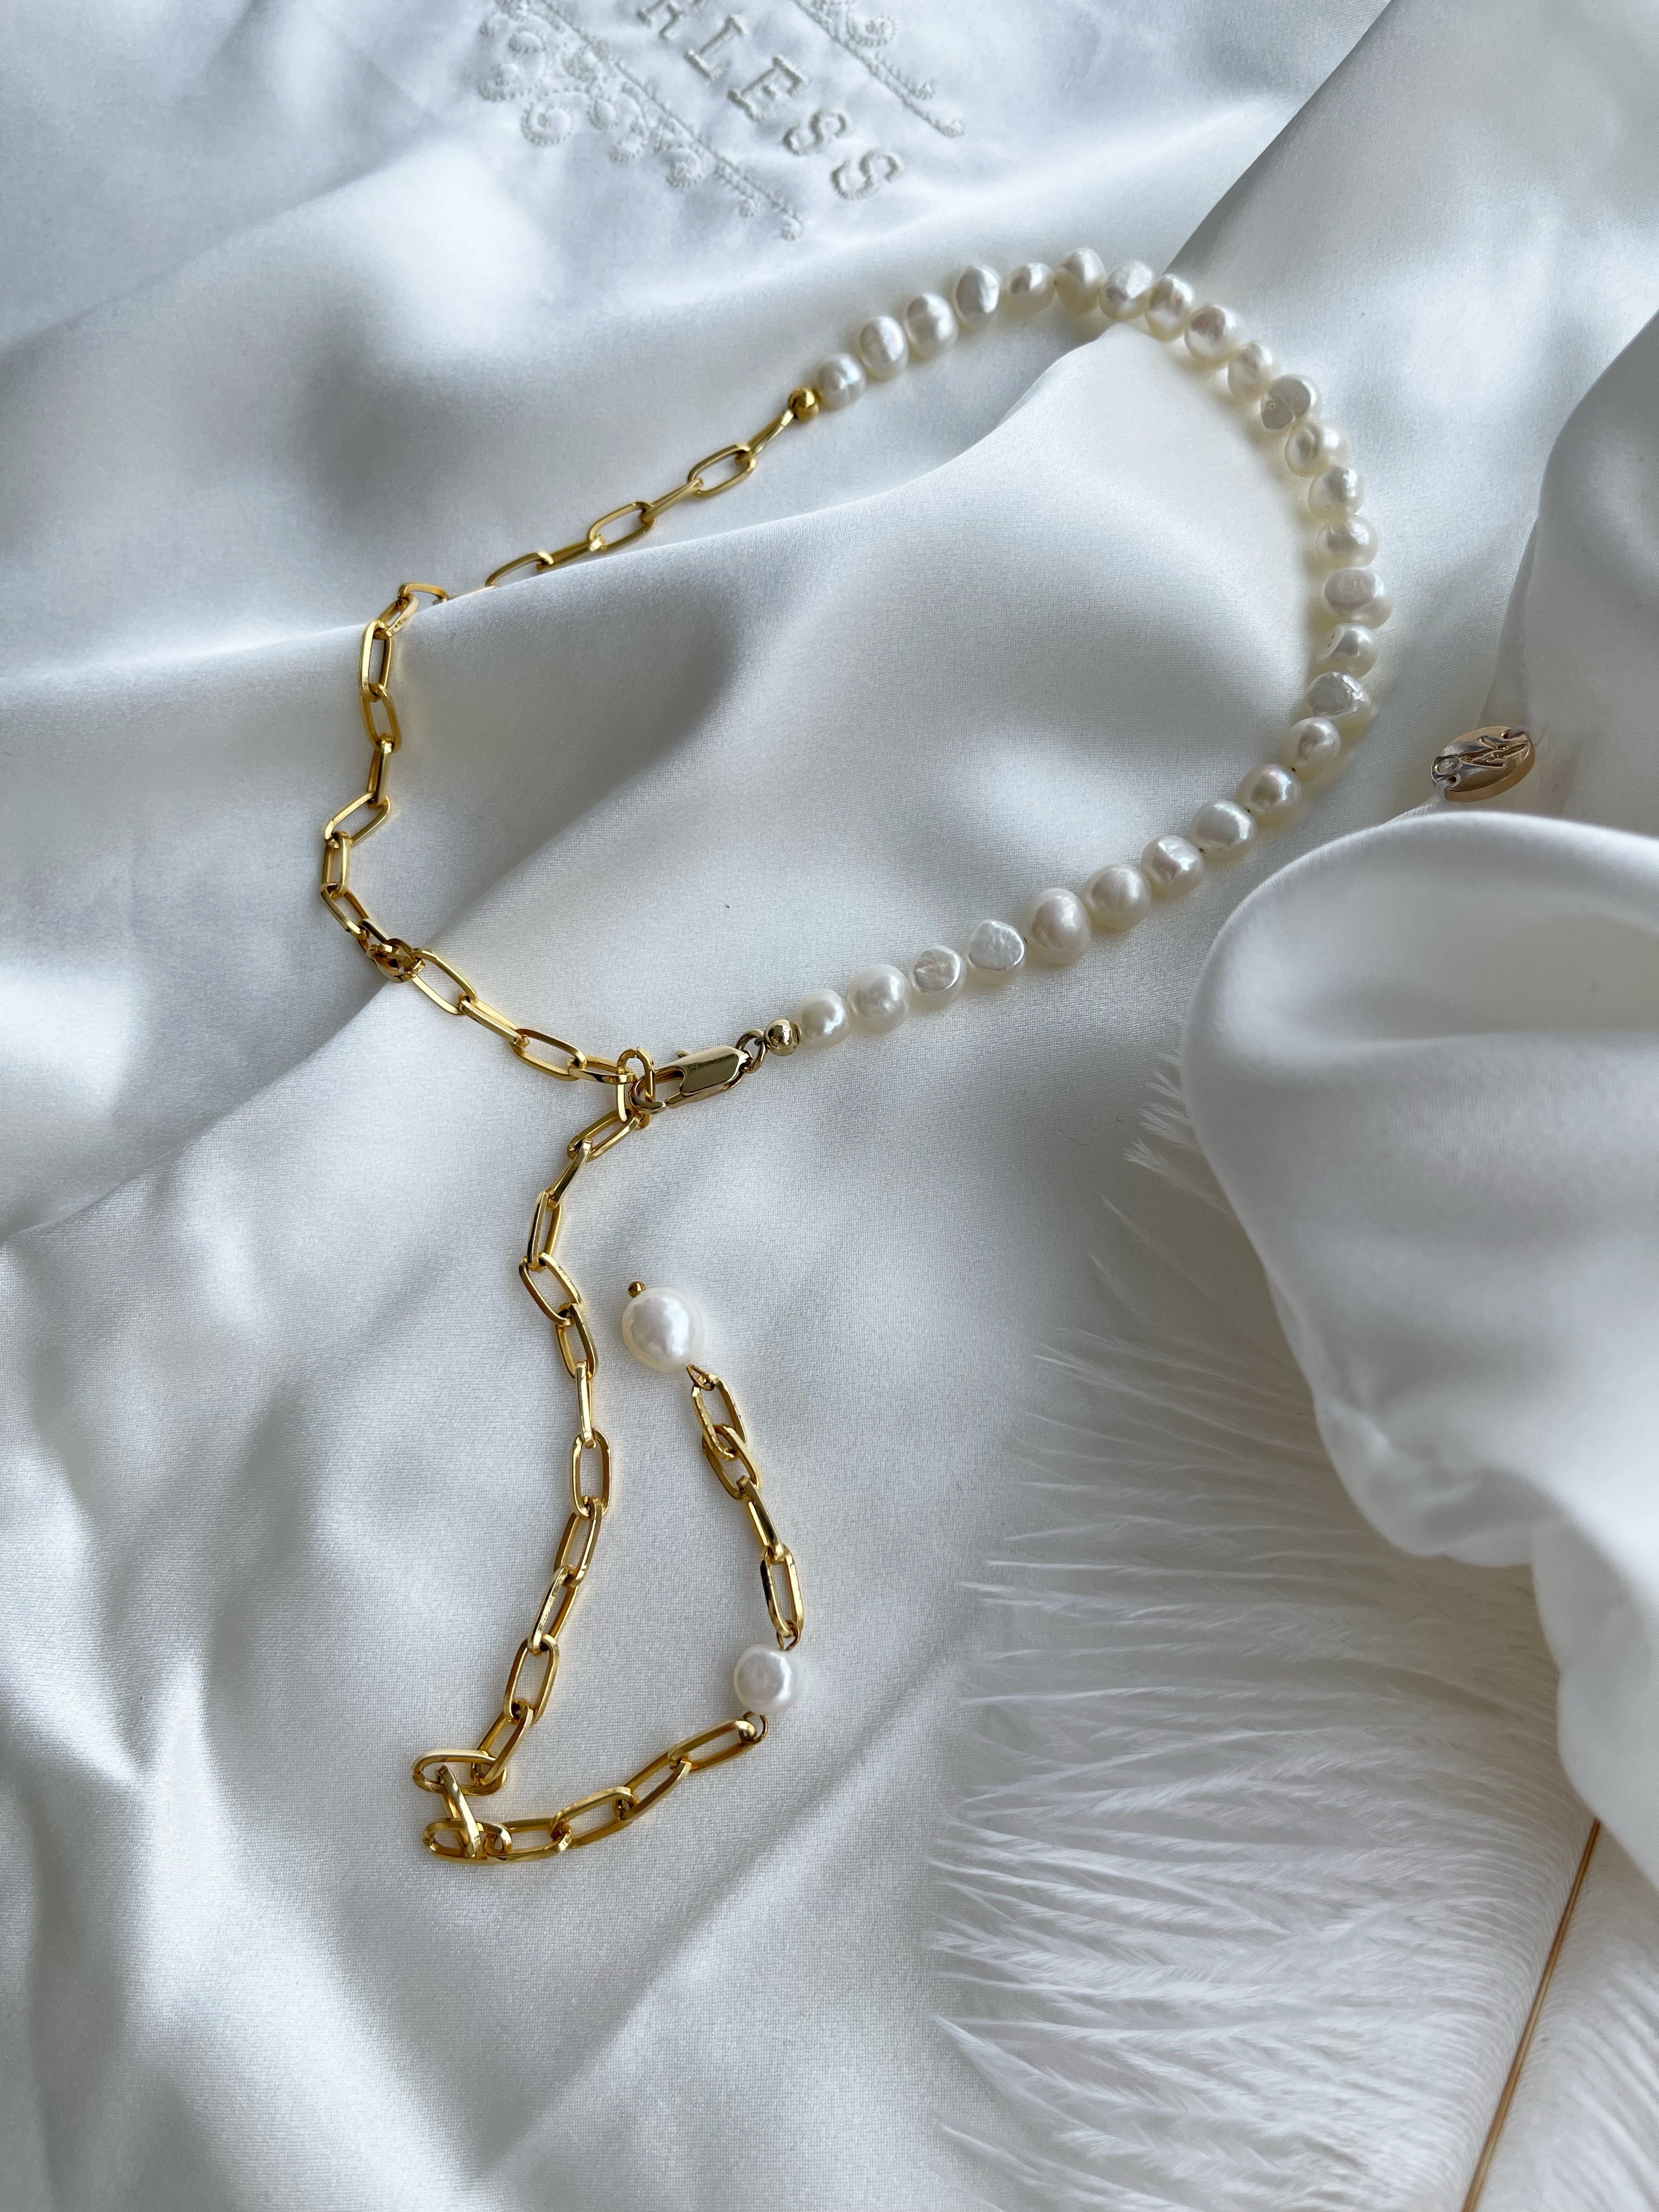 "Cultured Natural Pearl Necklace" by Shirley Navone with gold-plated metallic details.